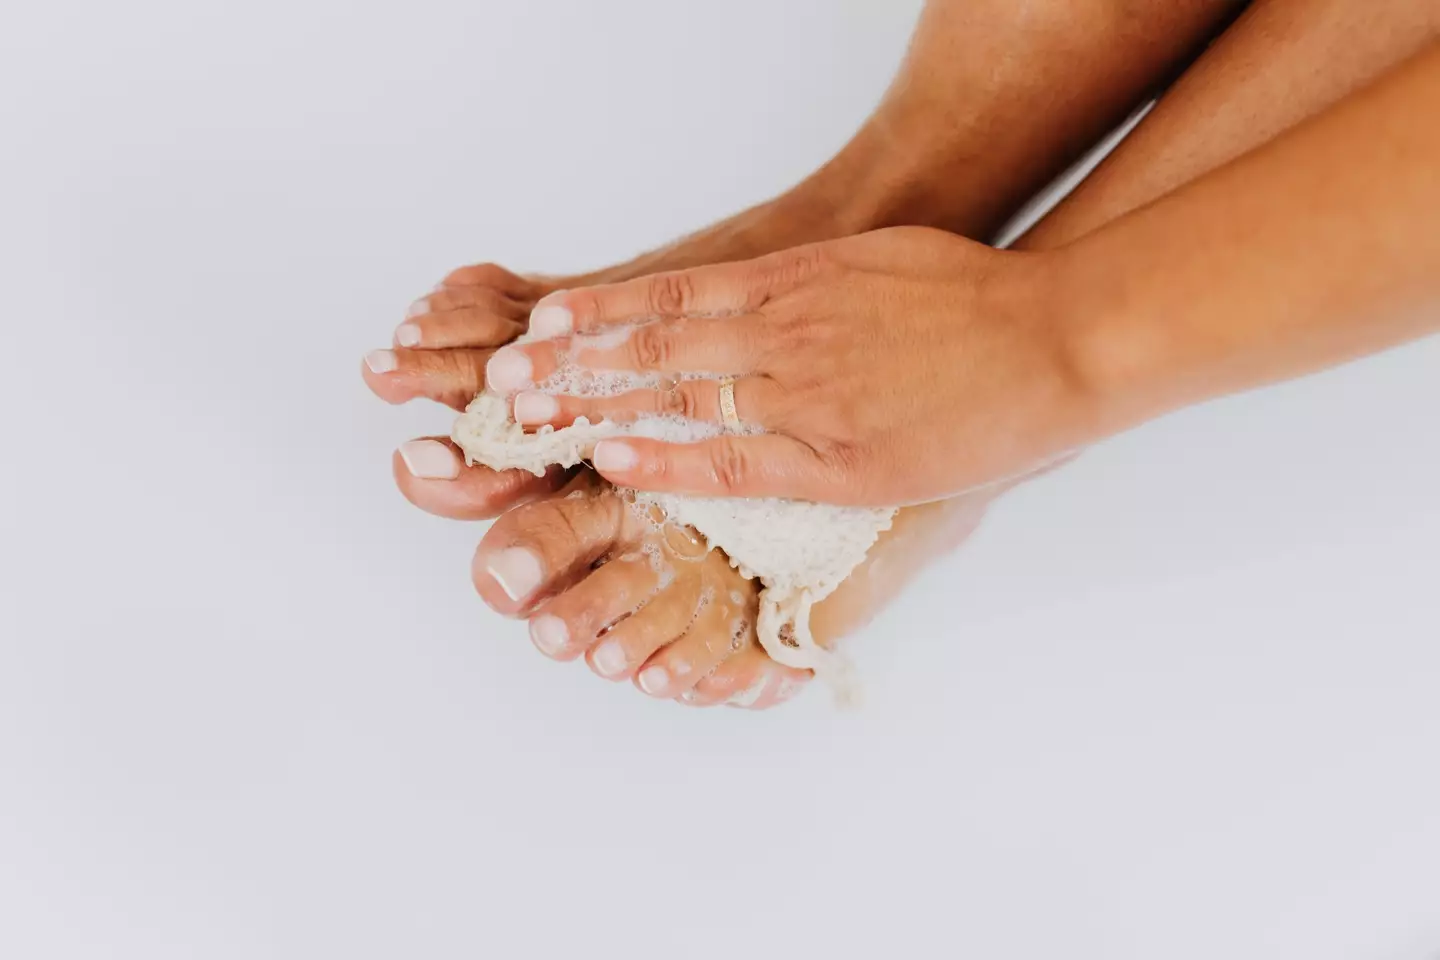 Experts agree washing feet is  best for foot health.